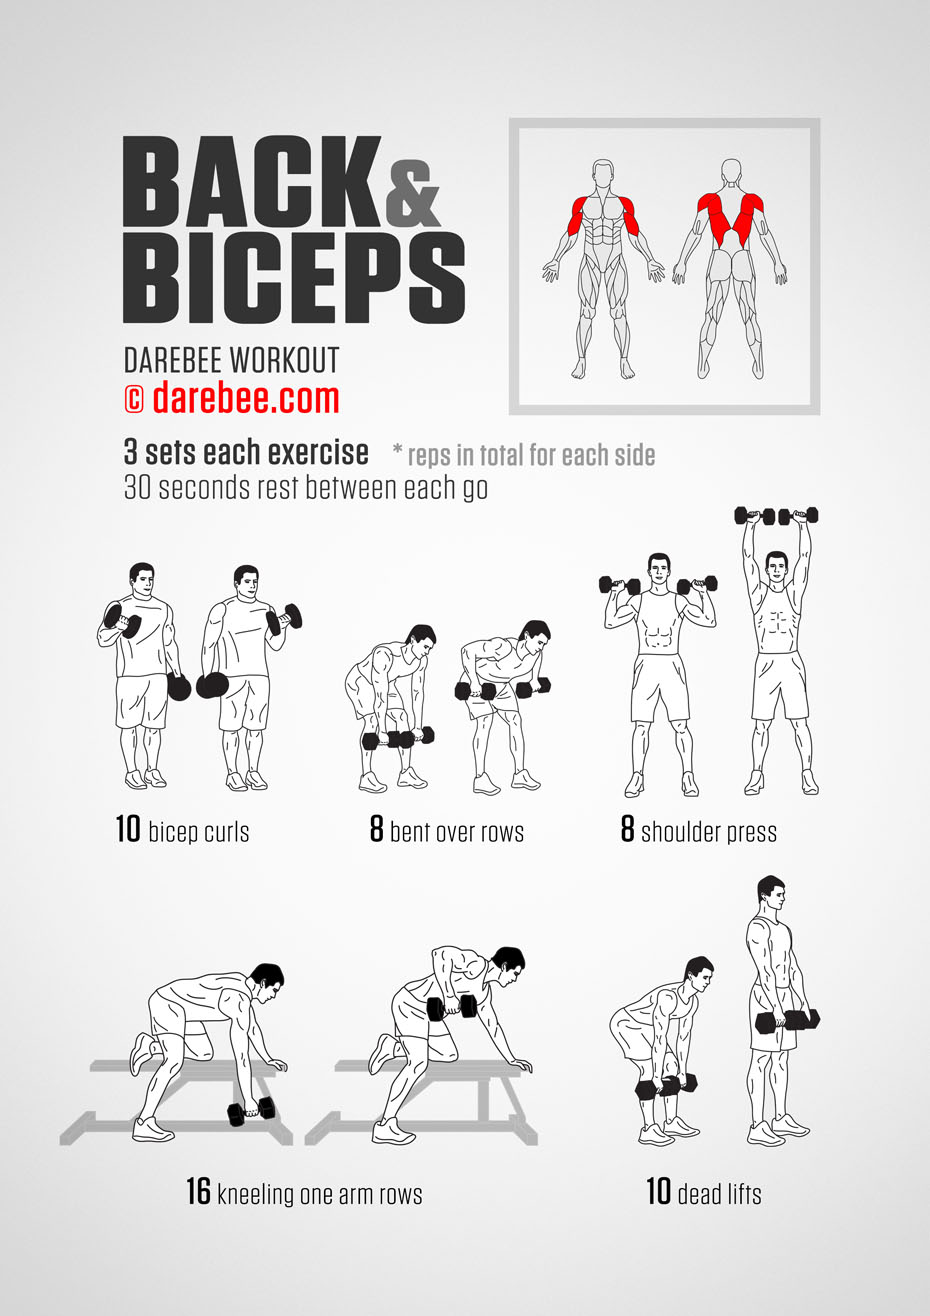 Back and Biceps Workout